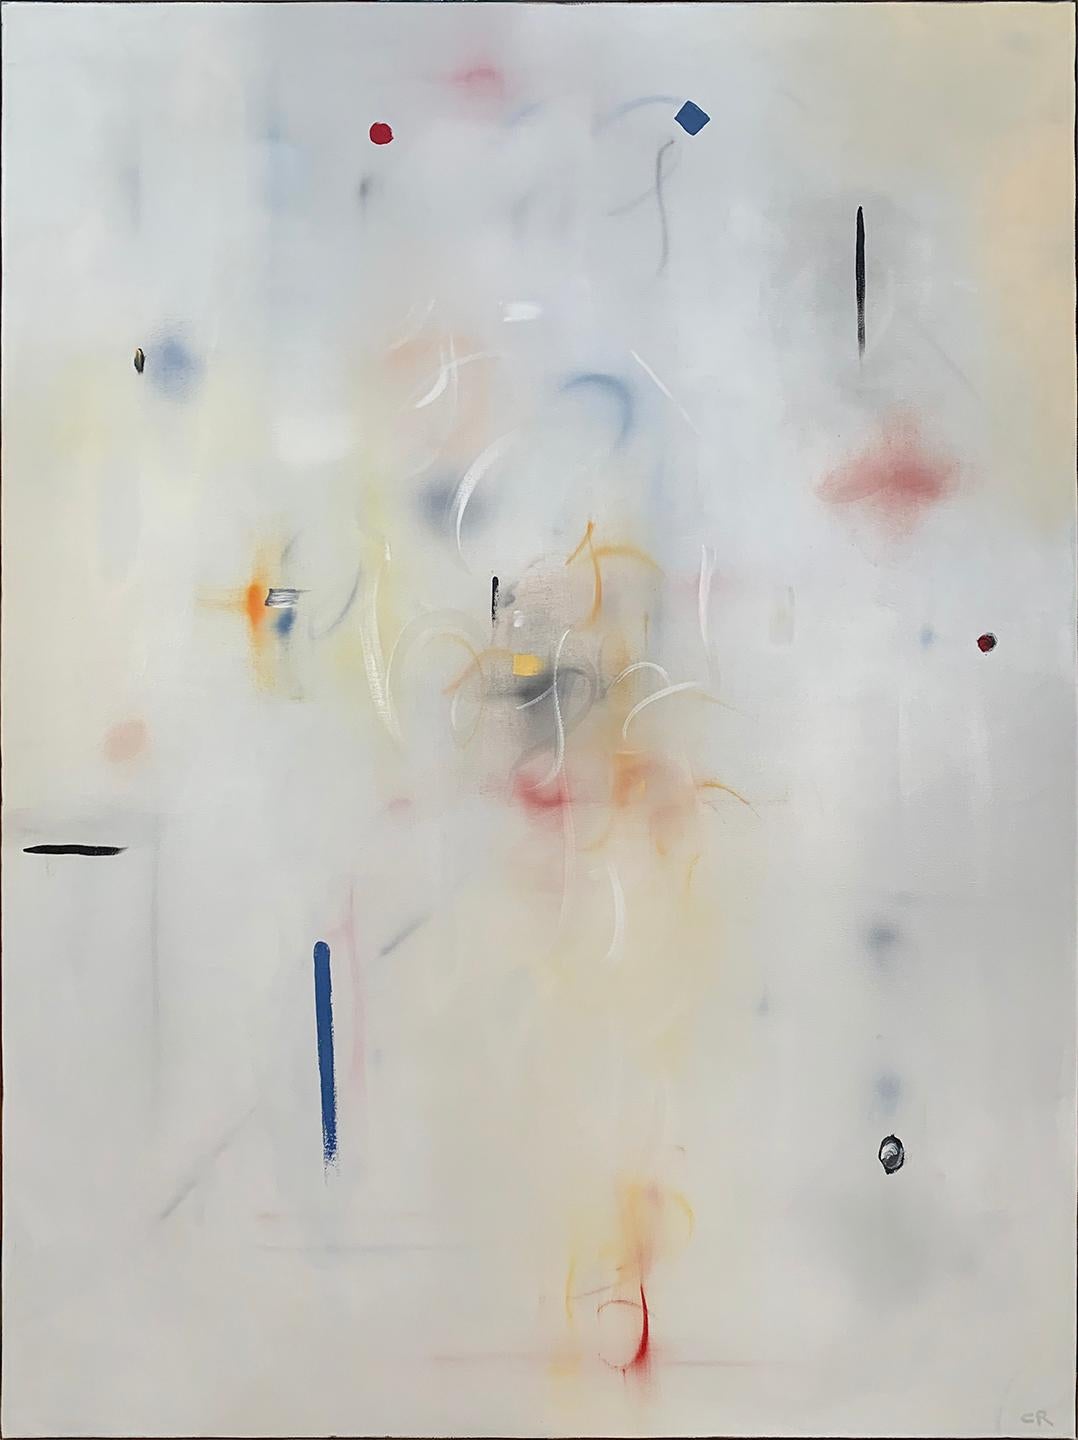 Taking cues from the anti-figurative aesthetic of American Abstract Expressionists, Ripley’s process is one of spontaneity and gesture. Color is applied in broad strokes atop a black gesso surface. The paintings show the marks of their creation -